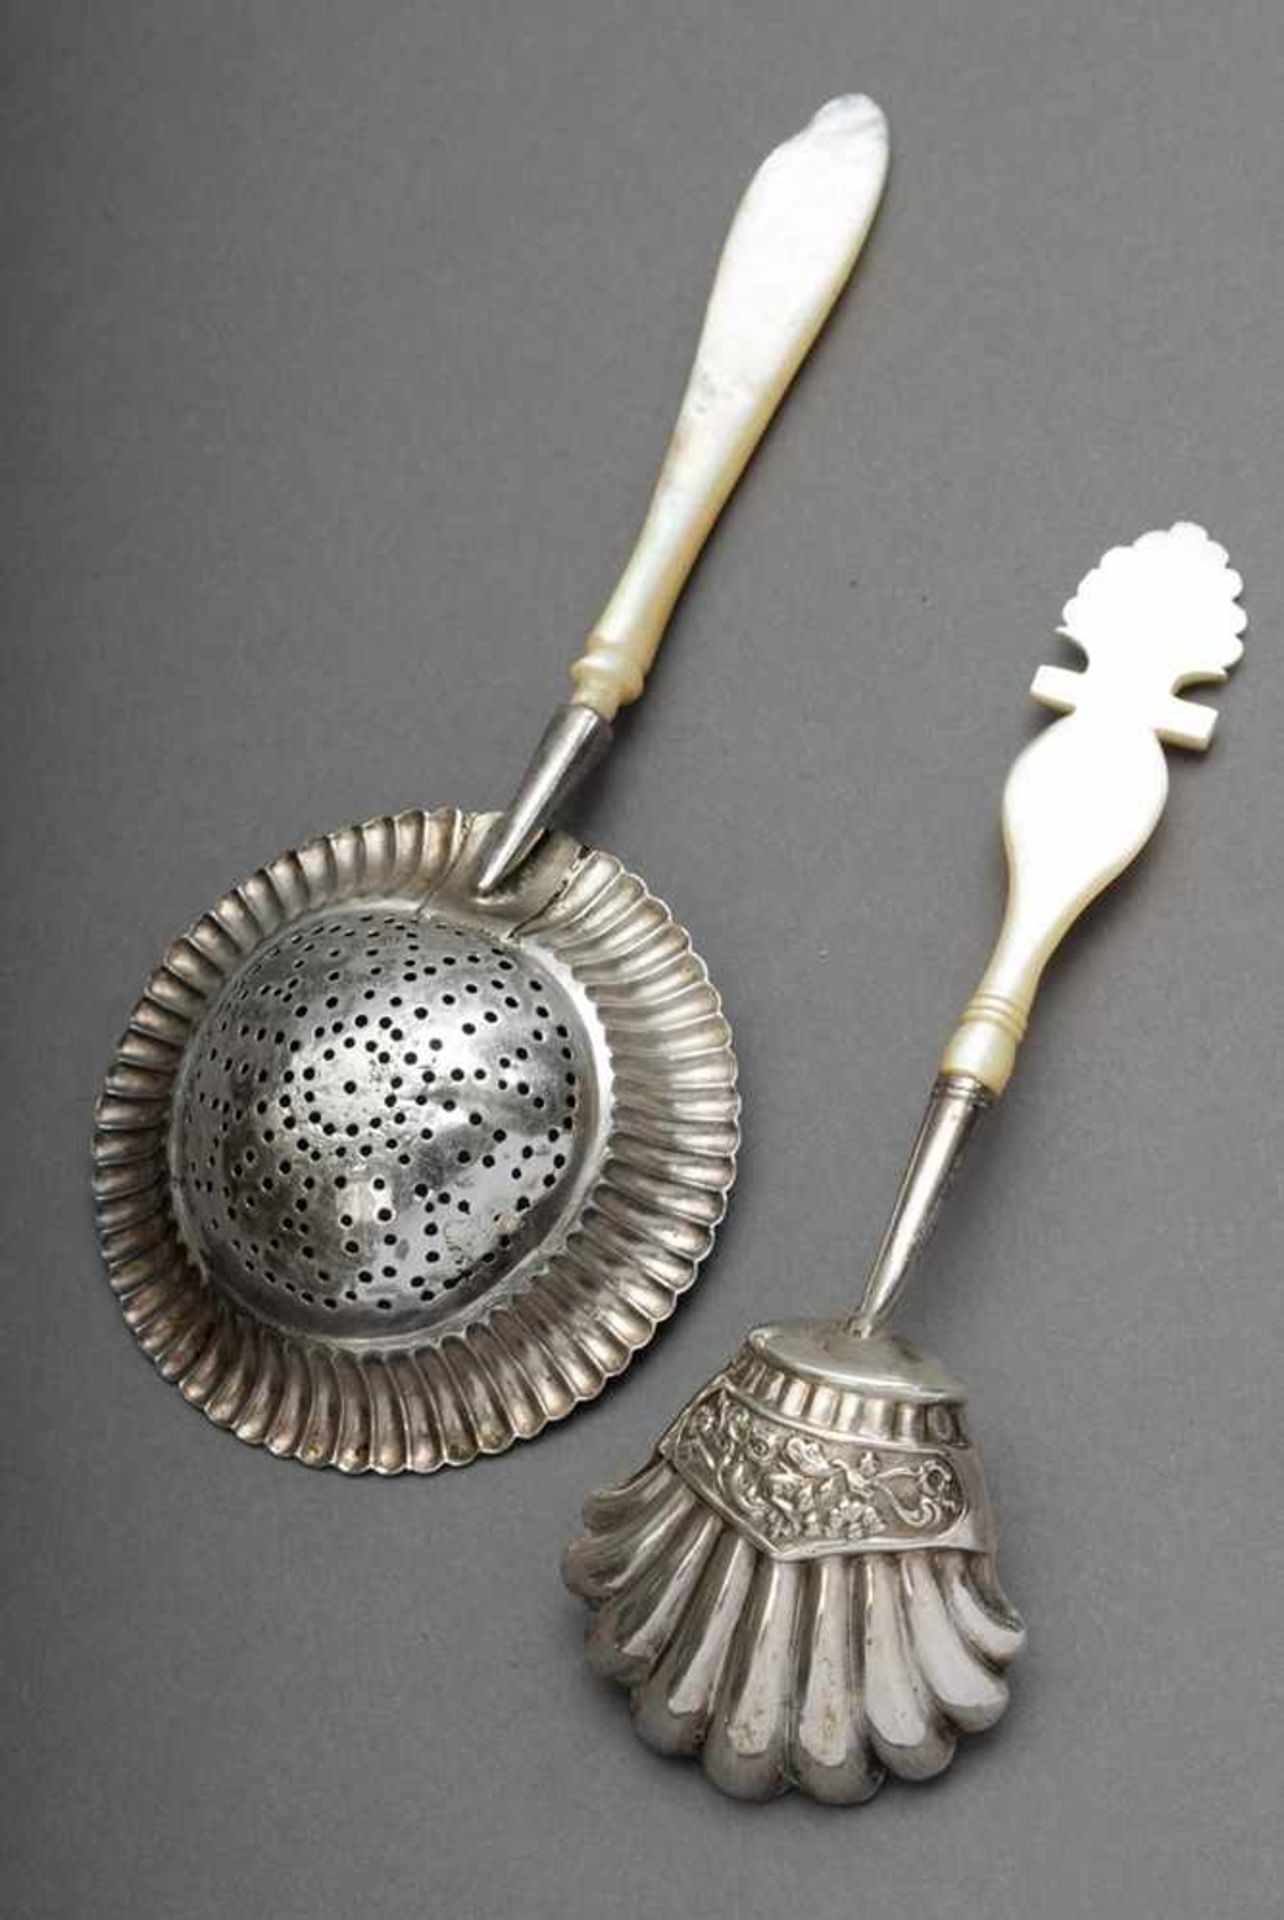 2 Various parts cutlery: chute and strainer with mother-of-pearl handles, 19th century, silver, l. - Bild 2 aus 2